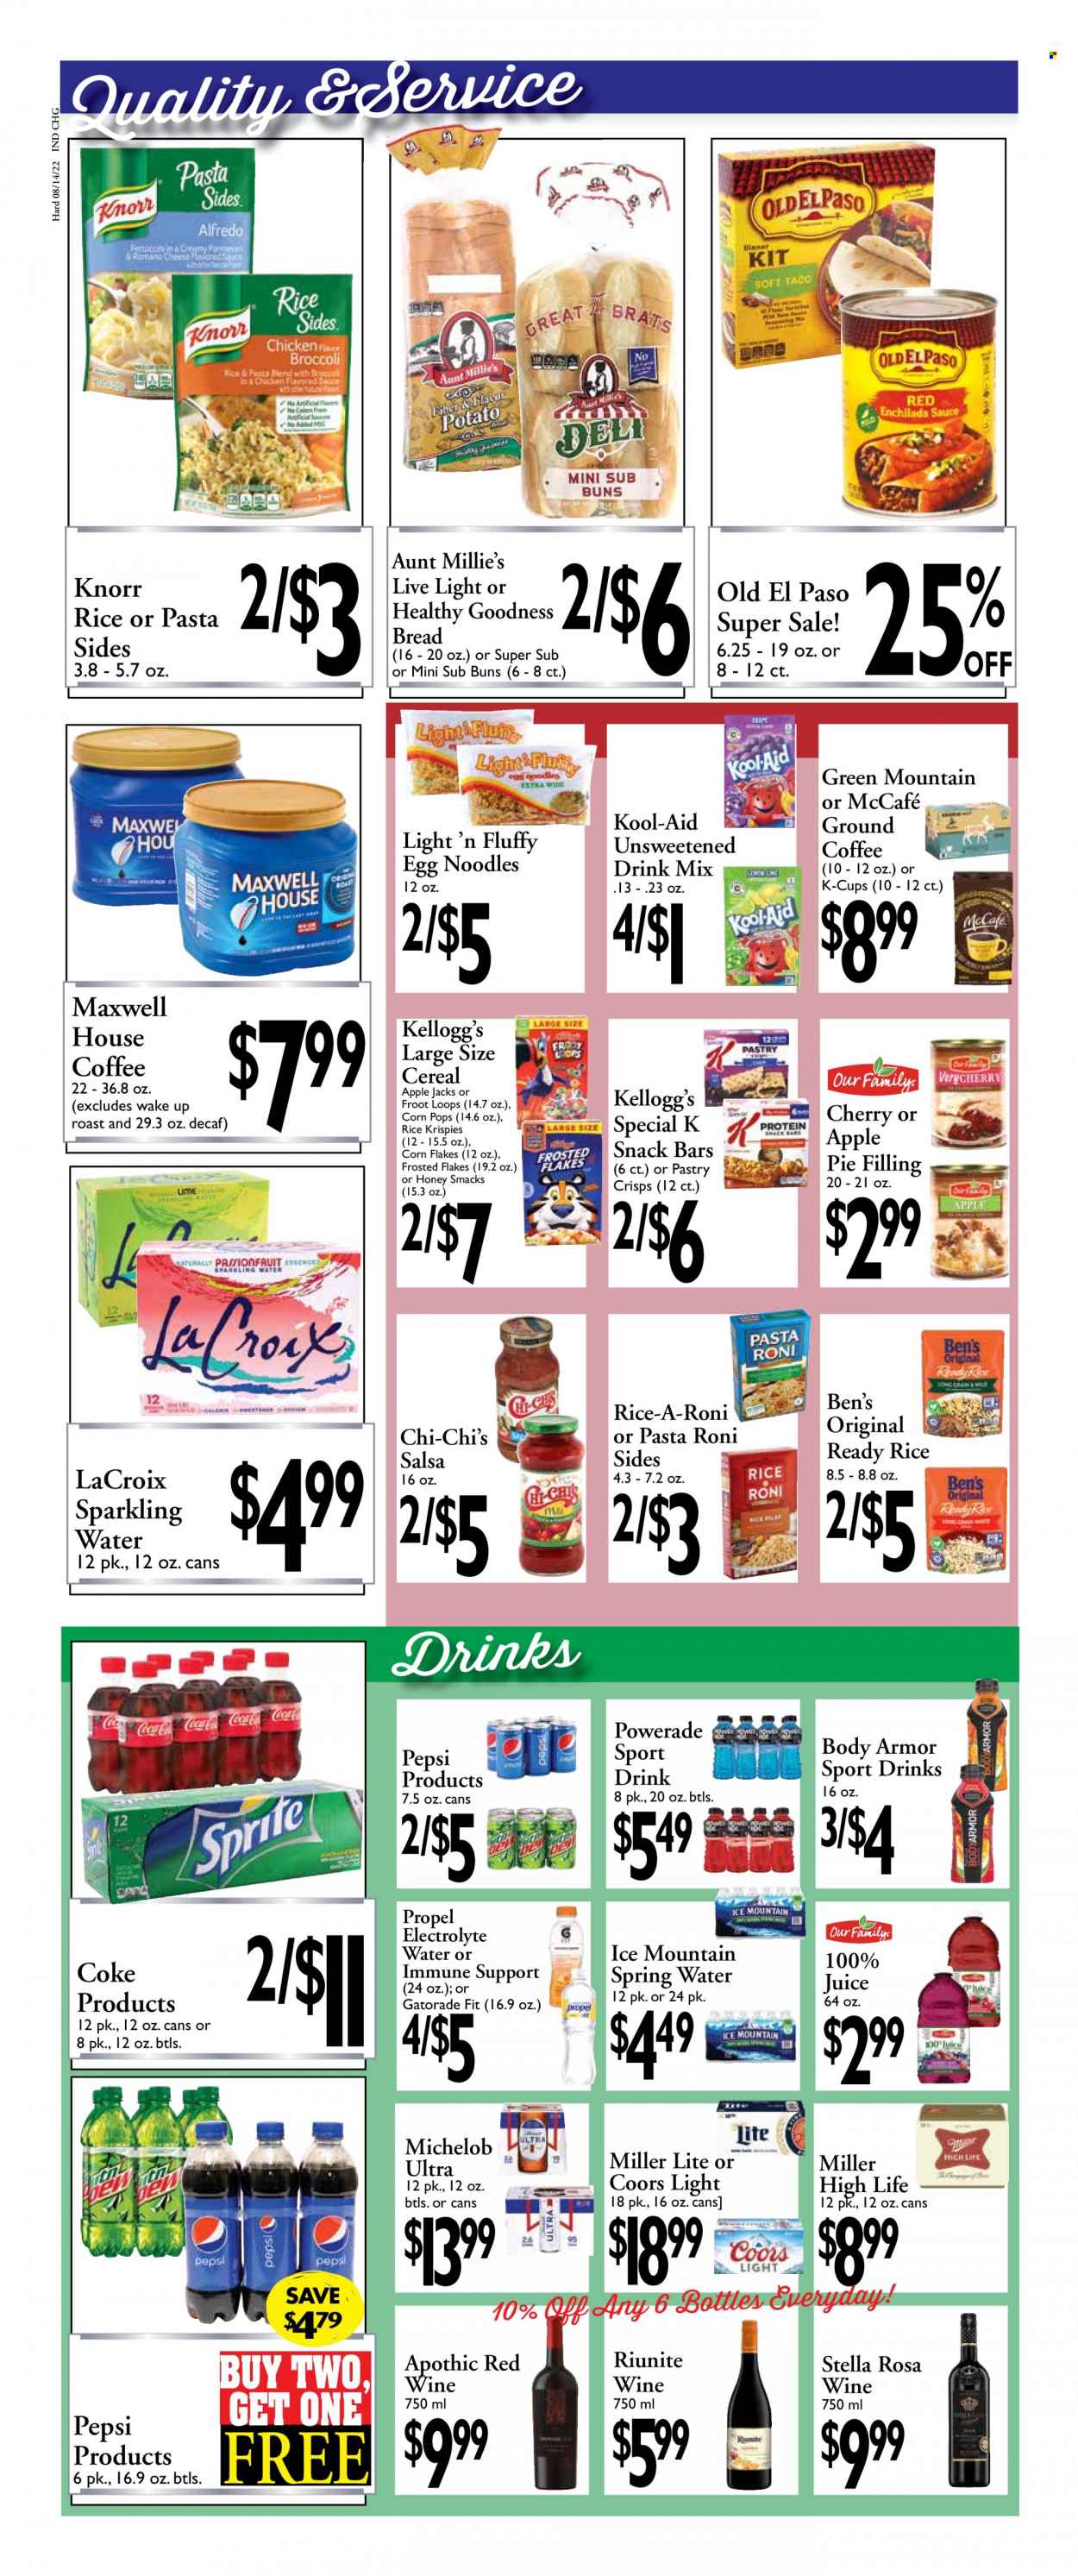 thumbnail - Harding's Markets Flyer - 08/14/2022 - 08/27/2022 - Sales products - bread, buns, Old El Paso, Knorr, noodles, pasta sides, snack, Kellogg's, snack bar, apple pie filling, pie filling, cereals, corn flakes, Rice Krispies, Frosted Flakes, Corn Pops, egg noodles, salsa, Coca-Cola, Powerade, Pepsi, juice, Body Armor, Gatorade, spring water, sparkling water, Ice Mountain, Maxwell House, coffee, ground coffee, coffee capsules, McCafe, K-Cups, Green Mountain, red wine, wine, beer, Miller Lite, Coors, Michelob. Page 4.